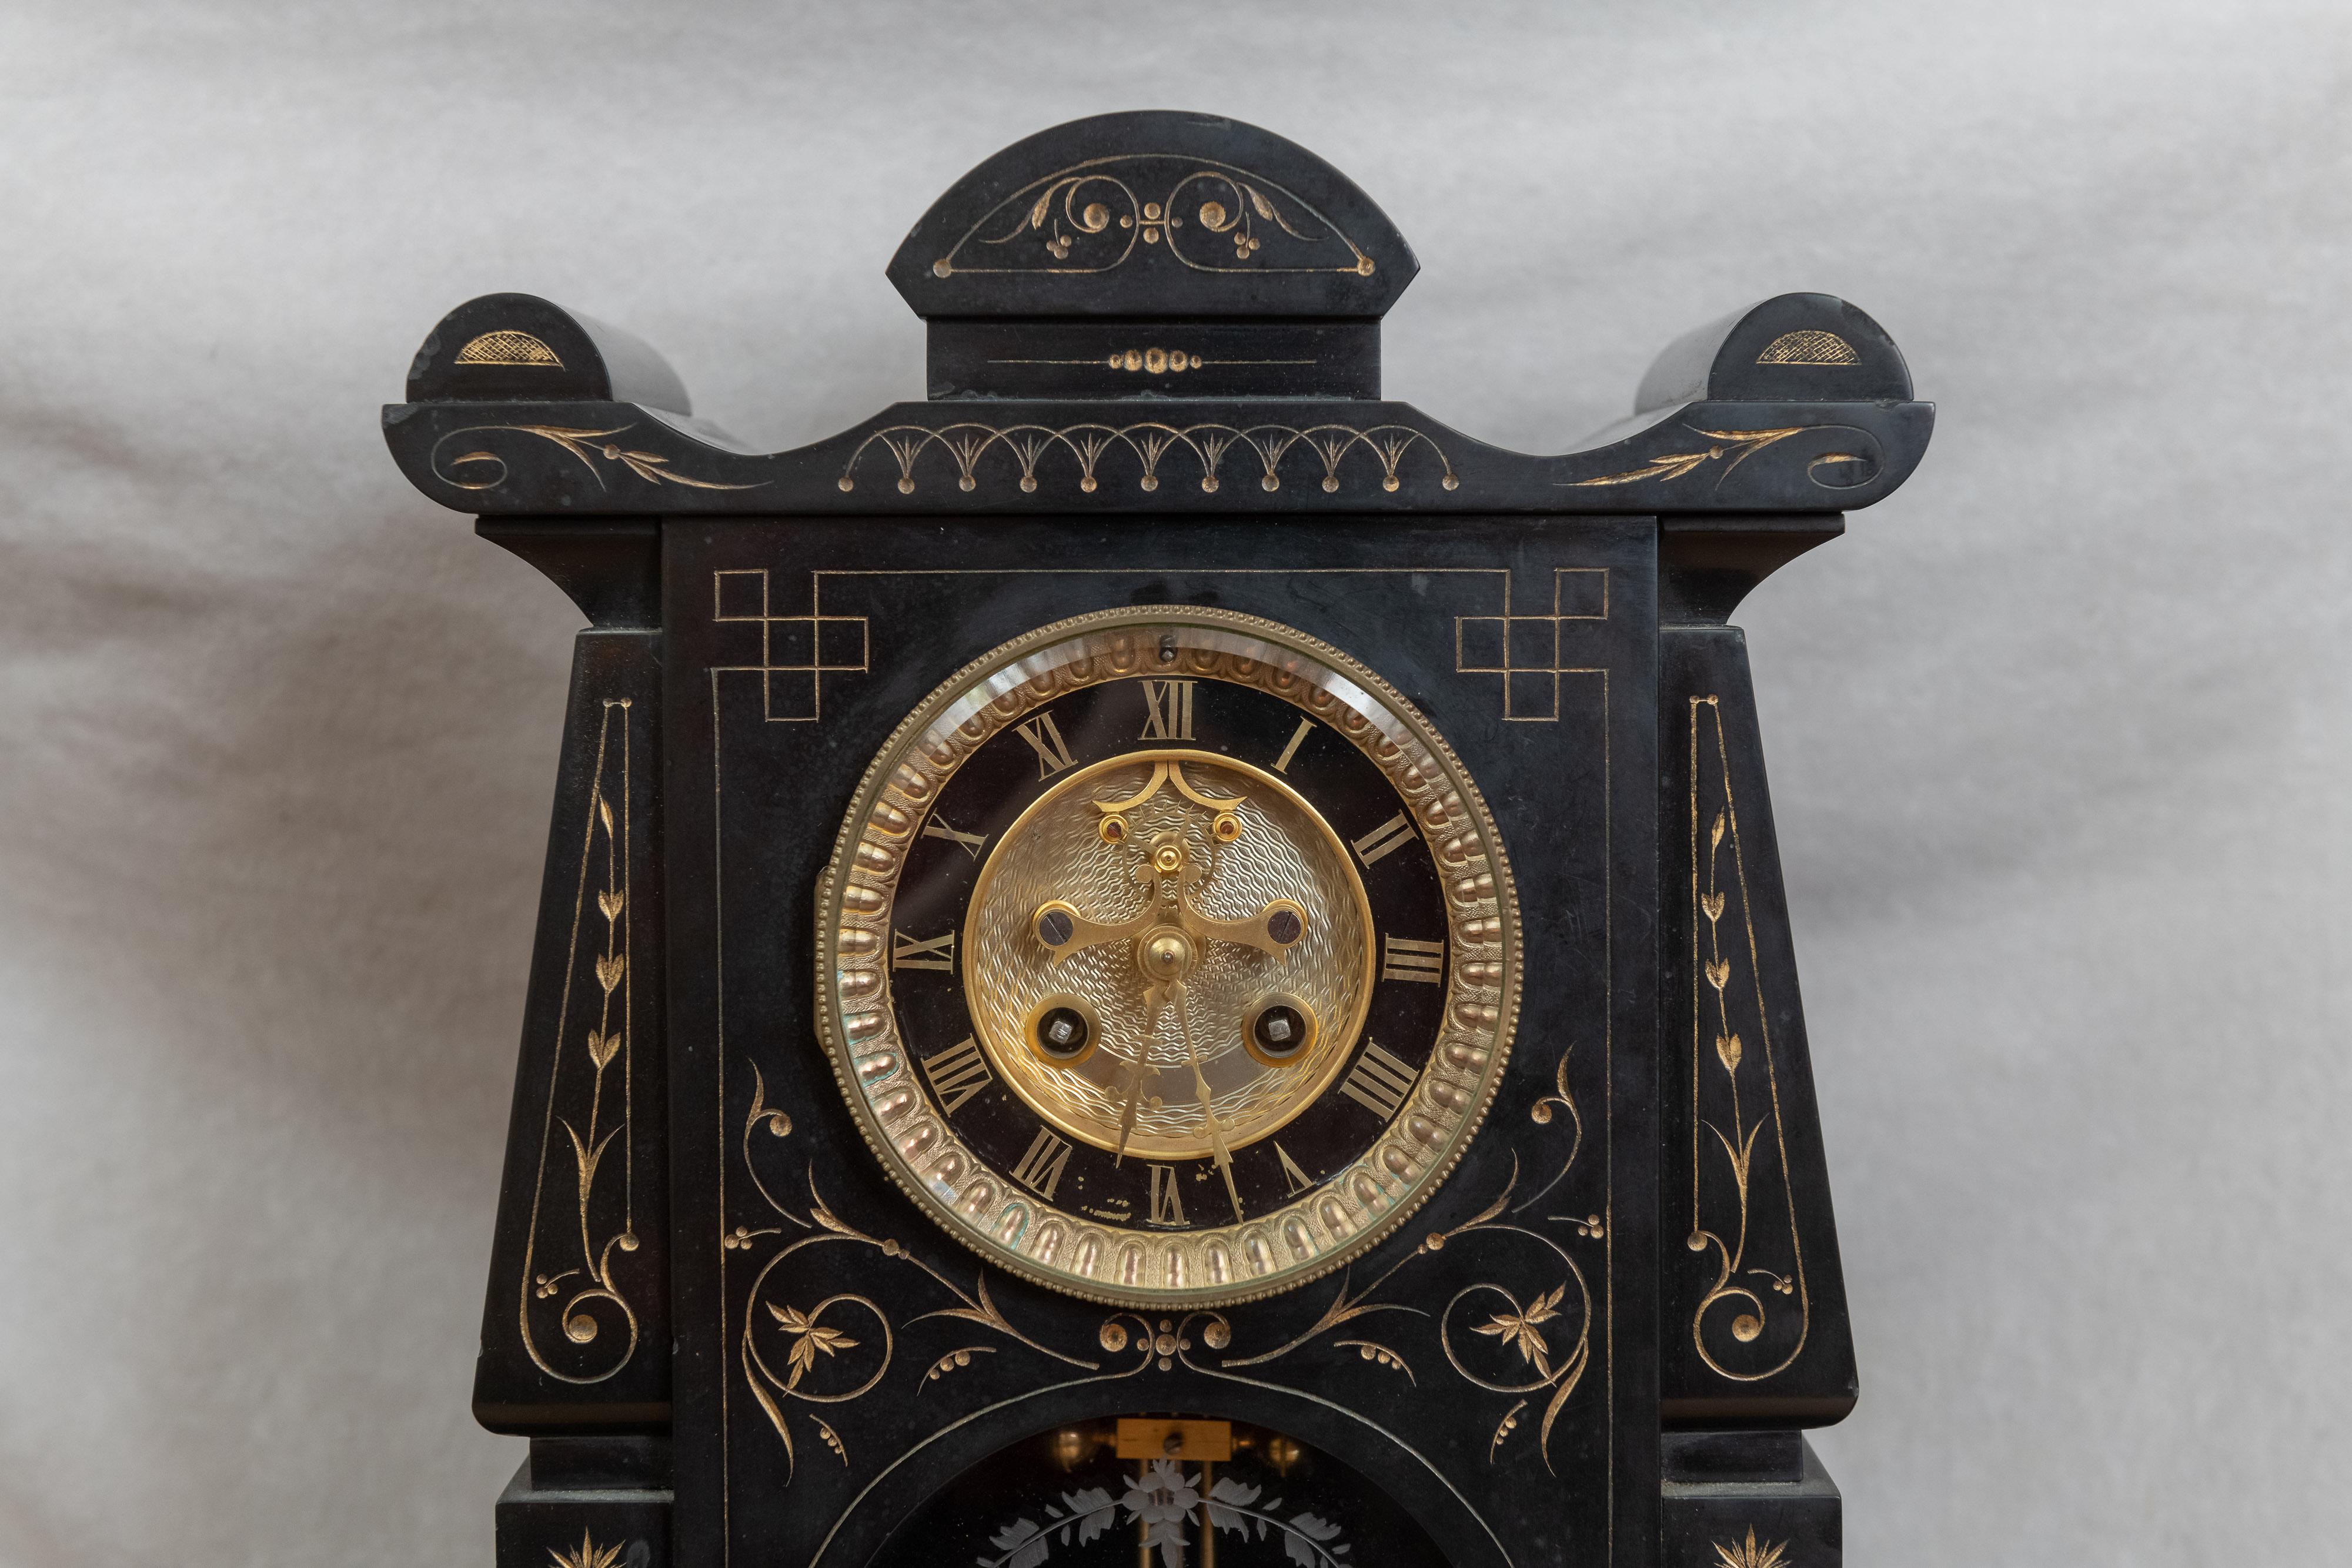 I see black marble clocks all the time in my over 40 years of a shop, and I buy clocks on occasion. One thing I never buy is black marble clocks because they are usually bland. This one seriously grabbed my attention. Just look at the incised gilt